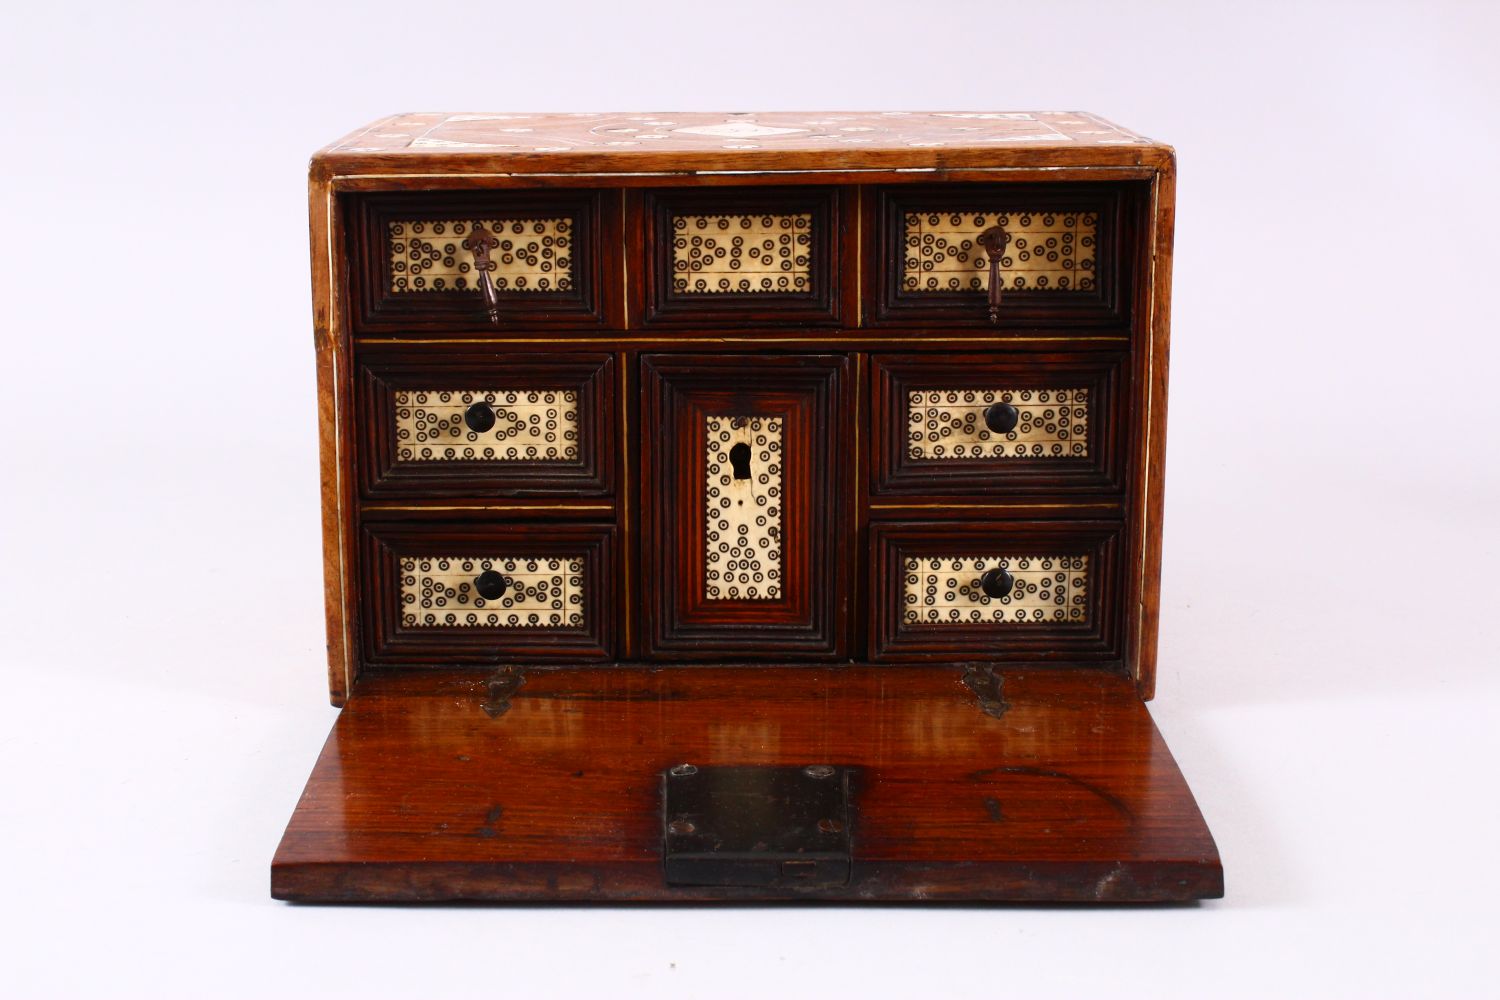 A LATE 16TH / EARLY 17TH CENTURY INDO PORTUGUESE BONE & IVORY INLAID BOX, the box with inlaid flower - Image 4 of 8